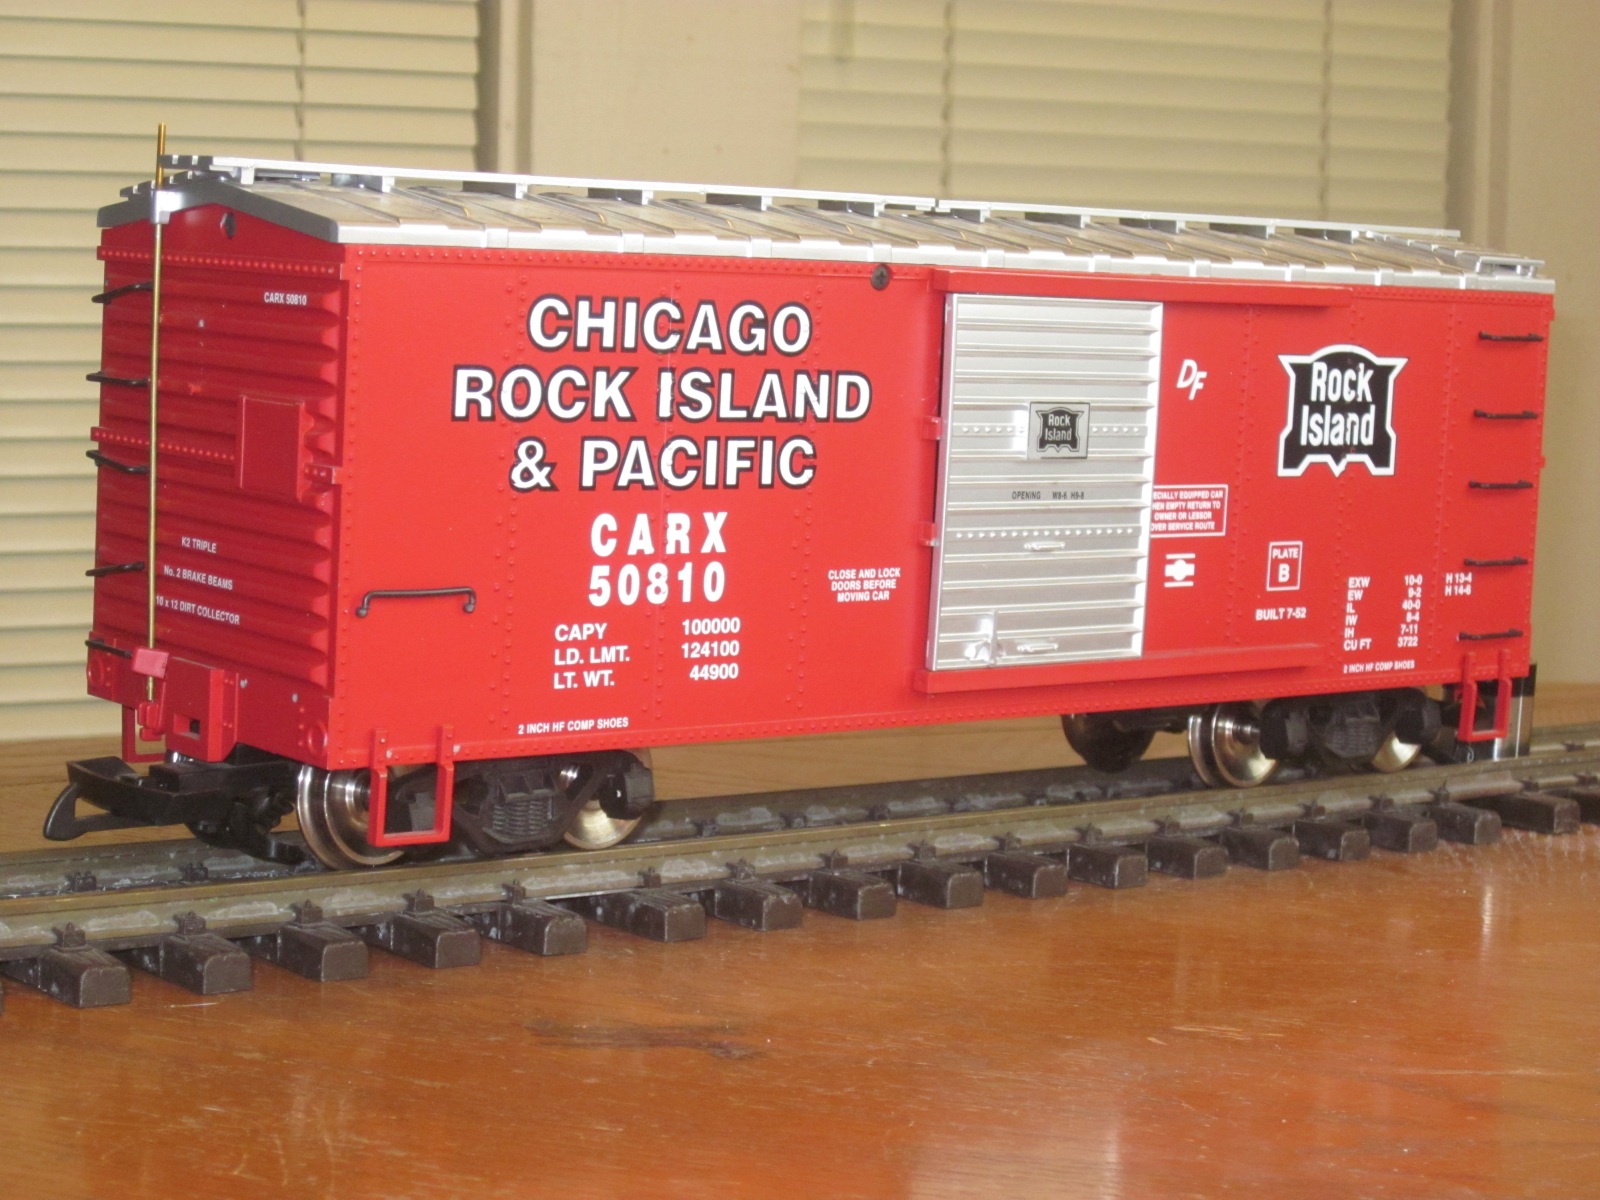 R19042 Chicago Rock Island & Pacific #CARX 2050810